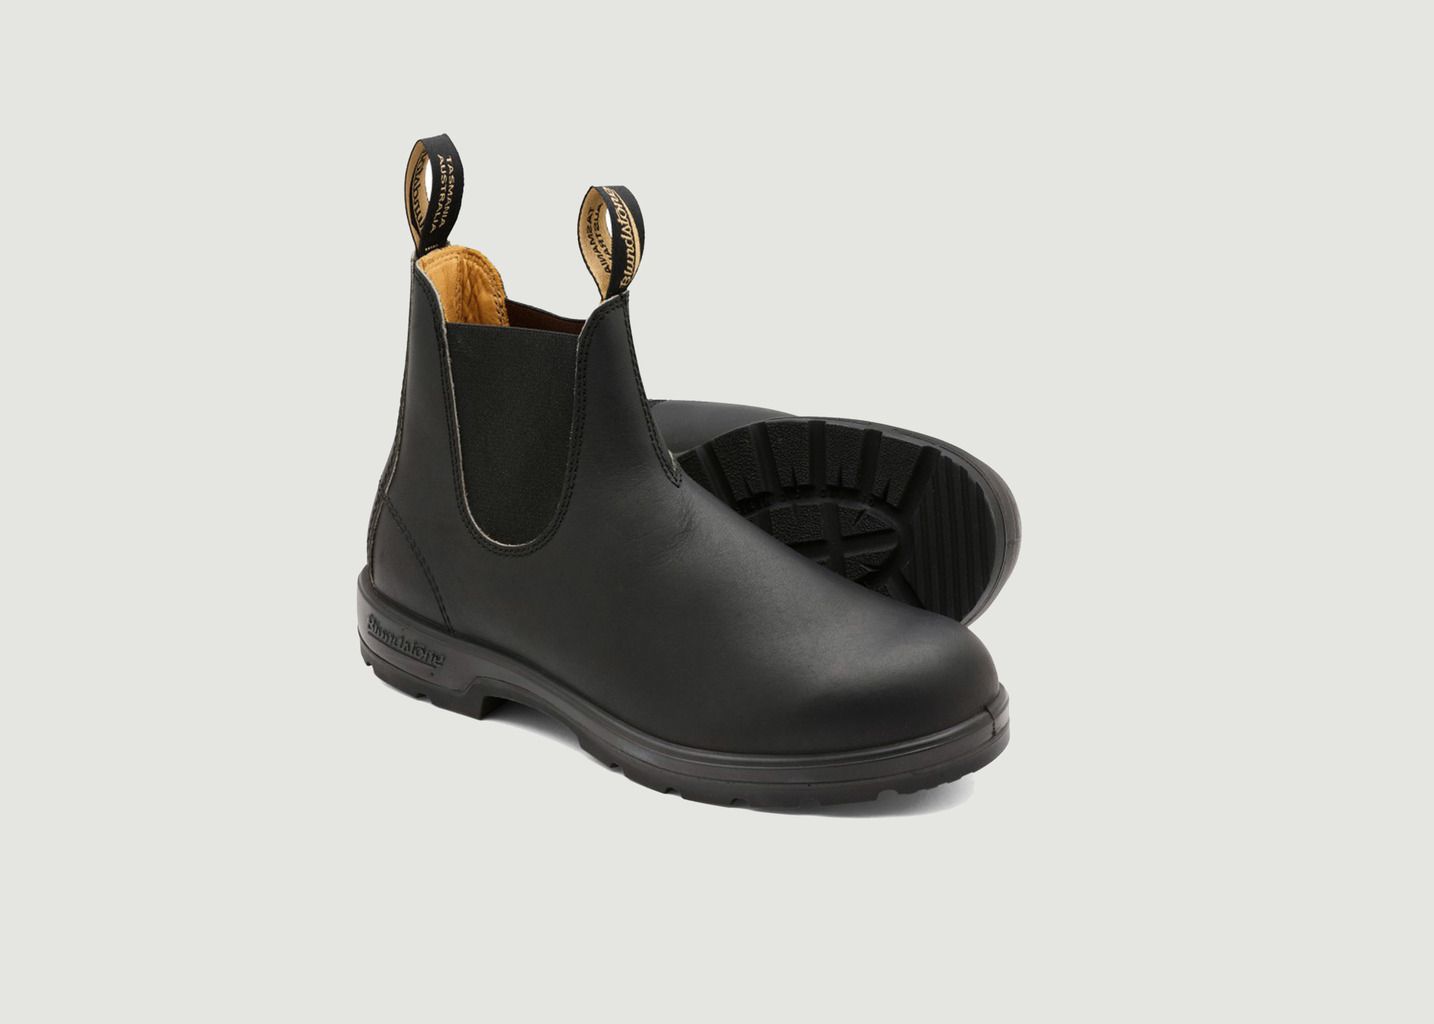 Classic Chelsea Boots - Blundstone